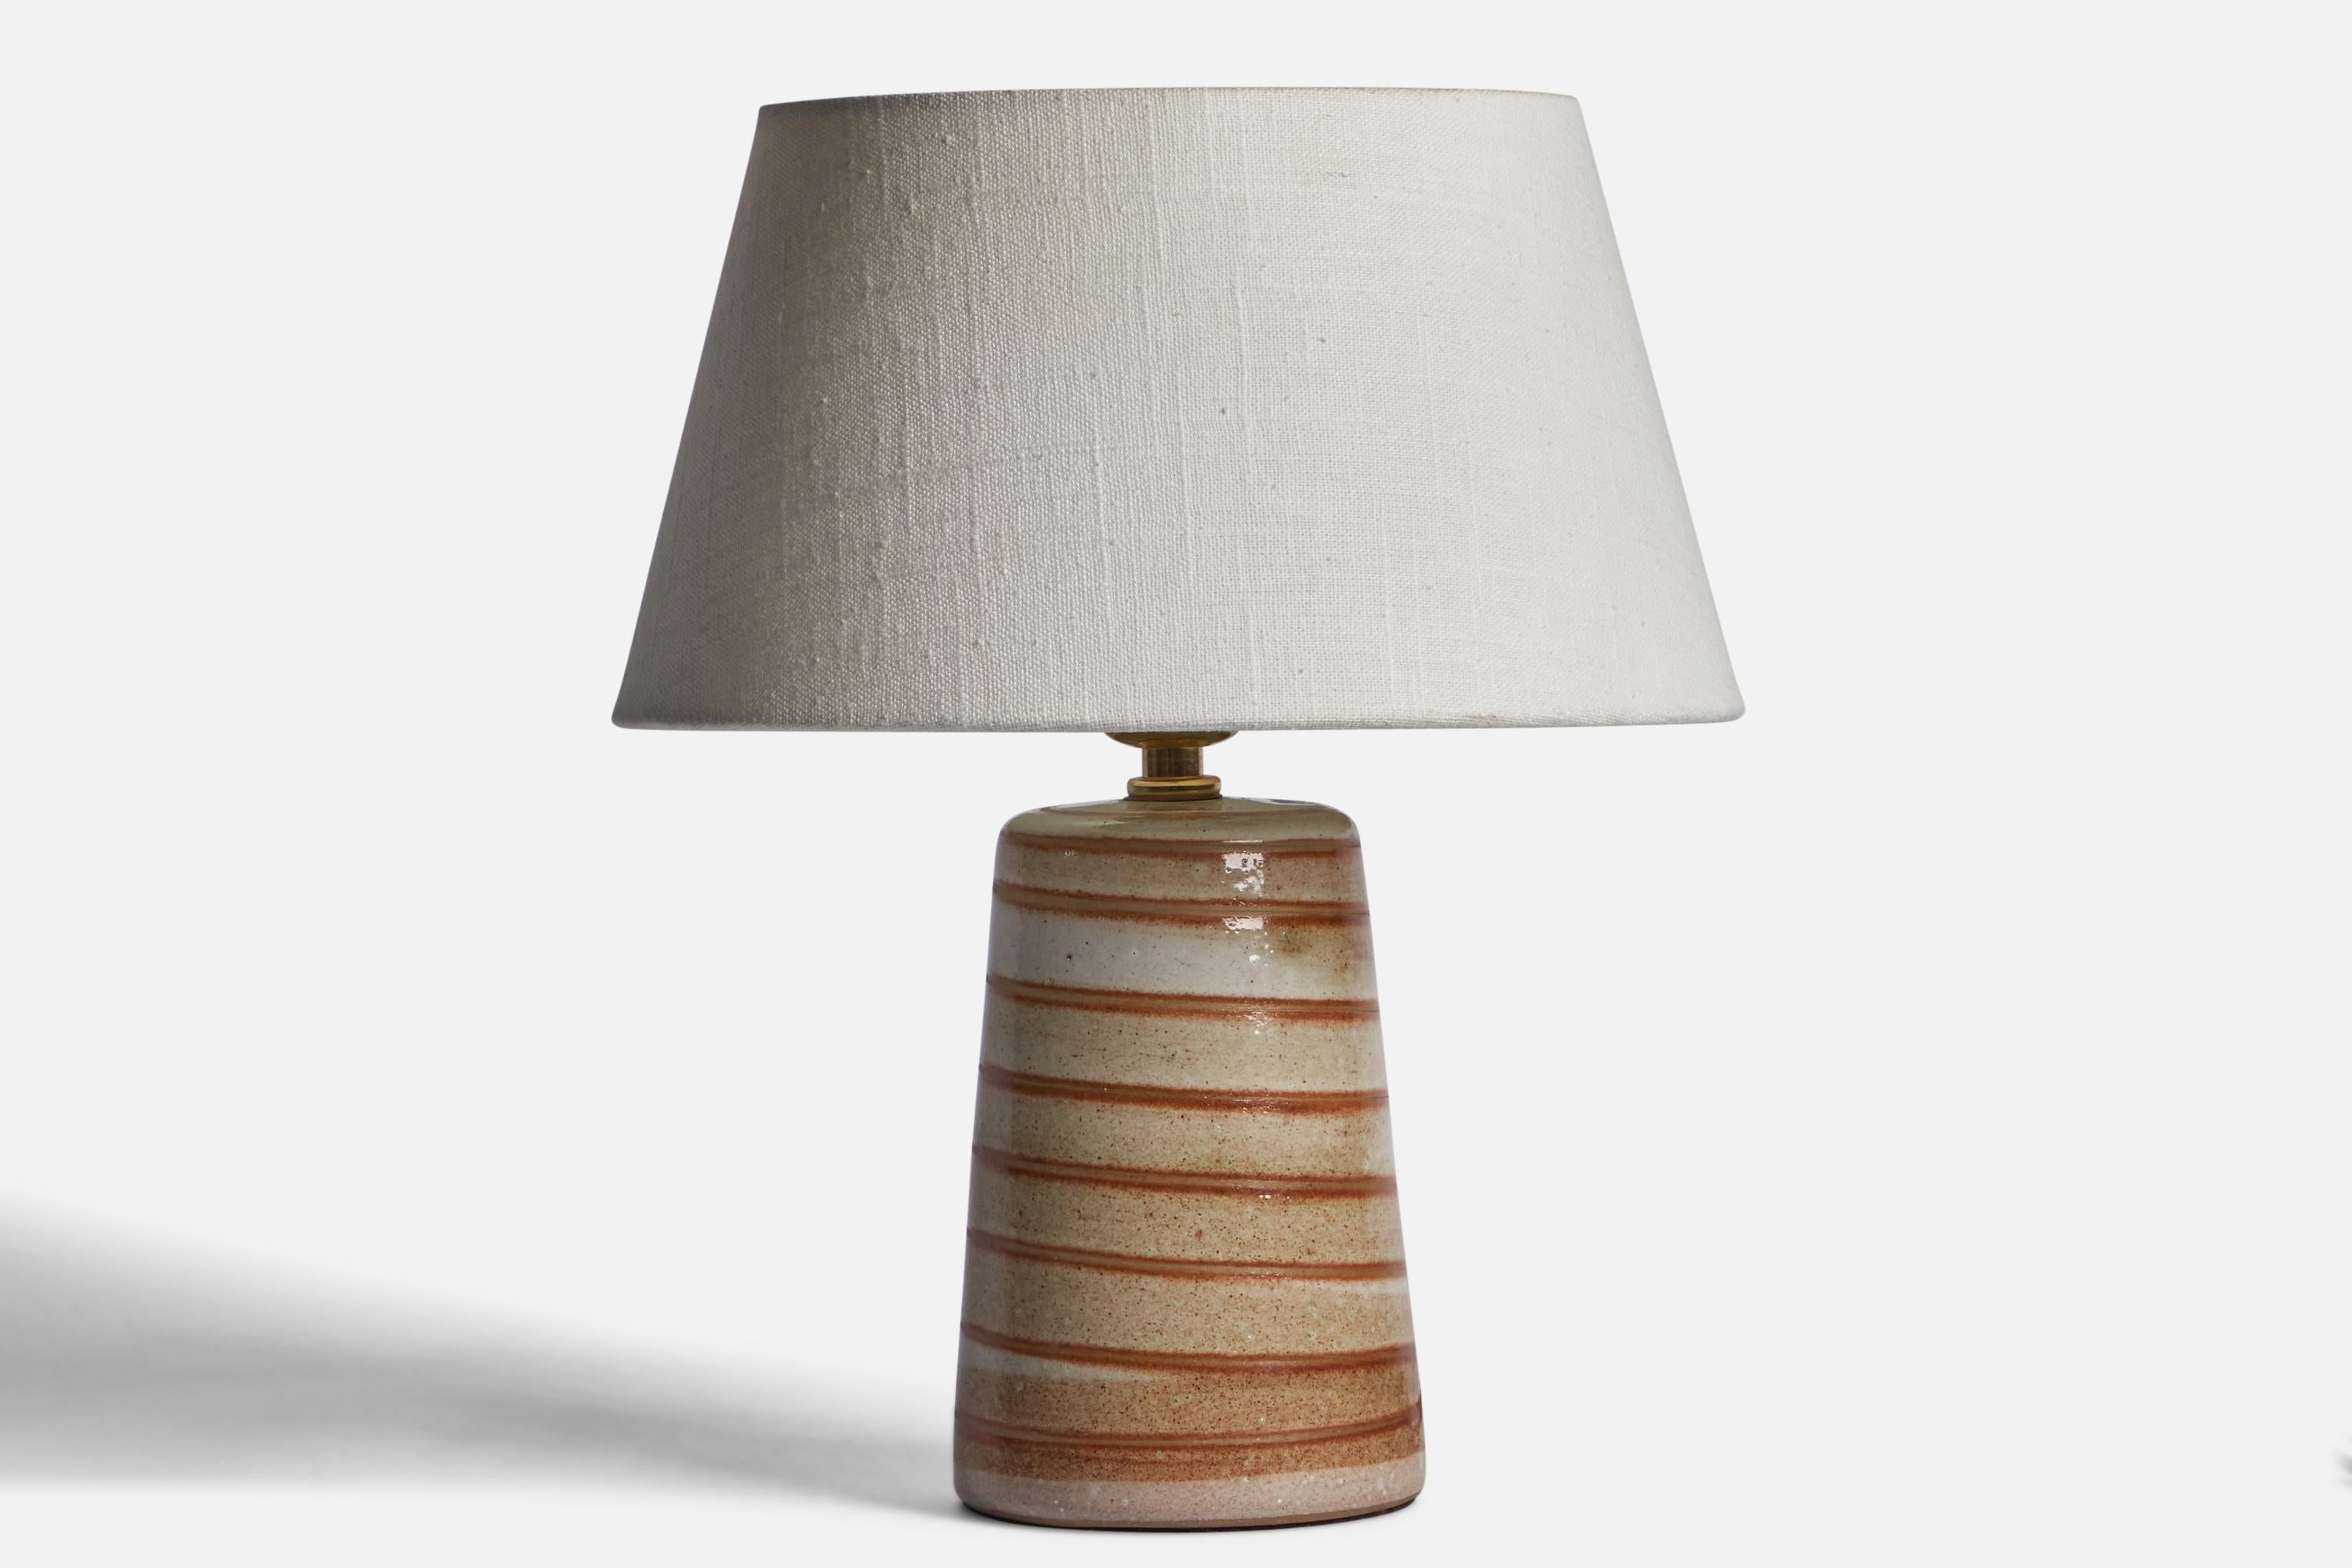 A beige and brown-glazed ceramic table lamp designed by Jane & Gordon Martz and produced by Marshall Studios, USA, 1960s.

 Dimensions of Lamp (inches): 9.15” H x 4.25” Diameter
Dimensions of Shade (inches): 7” Top Diameter x 10” Bottom Diameter x